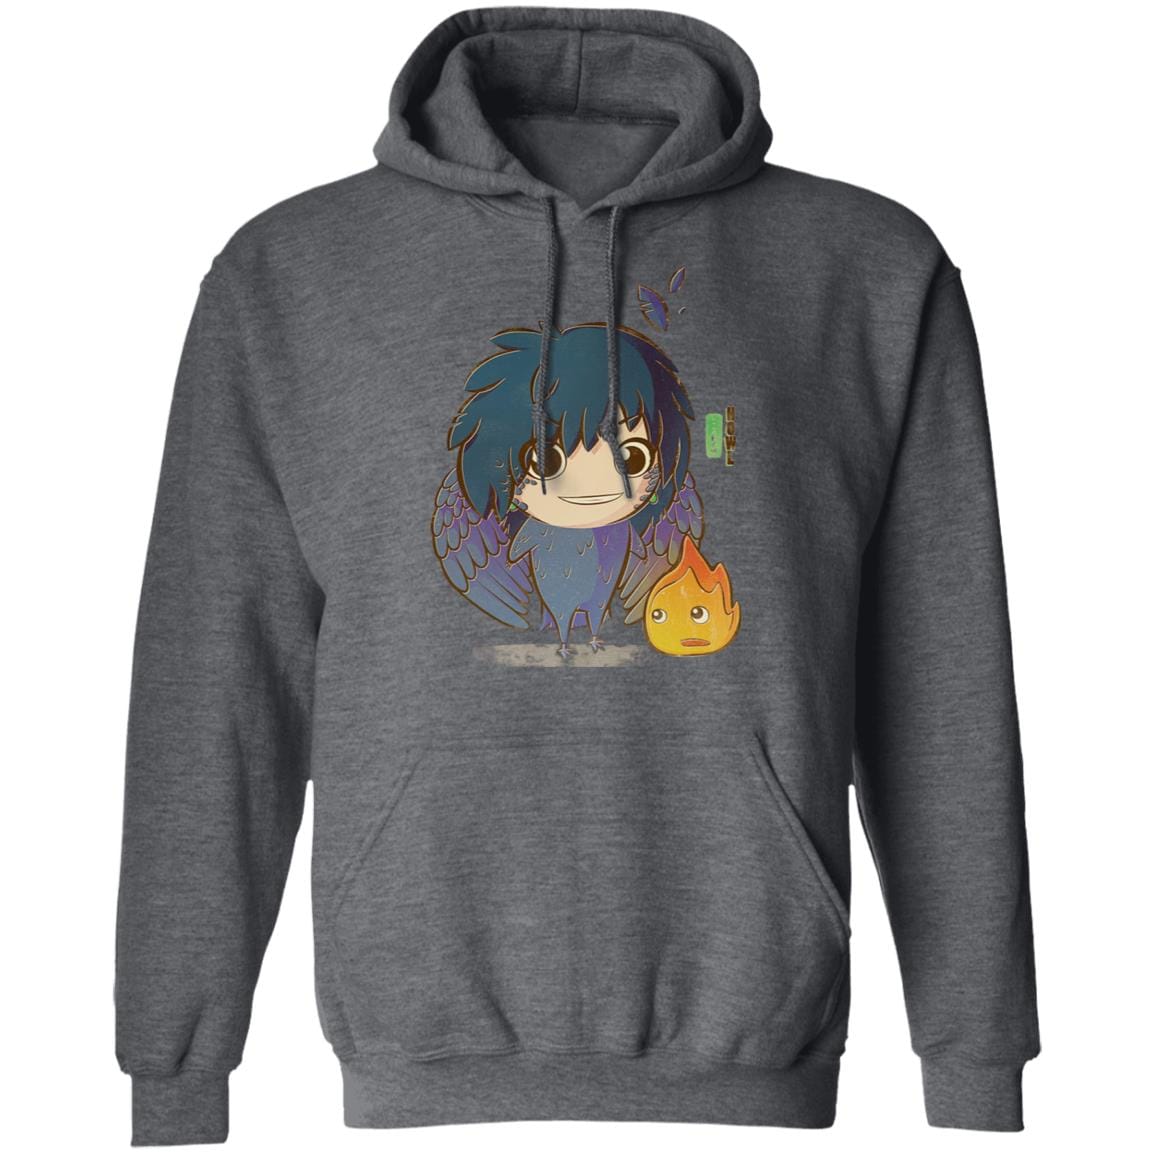 Howl’s Moving Castle – Howl Chibi Hoodie